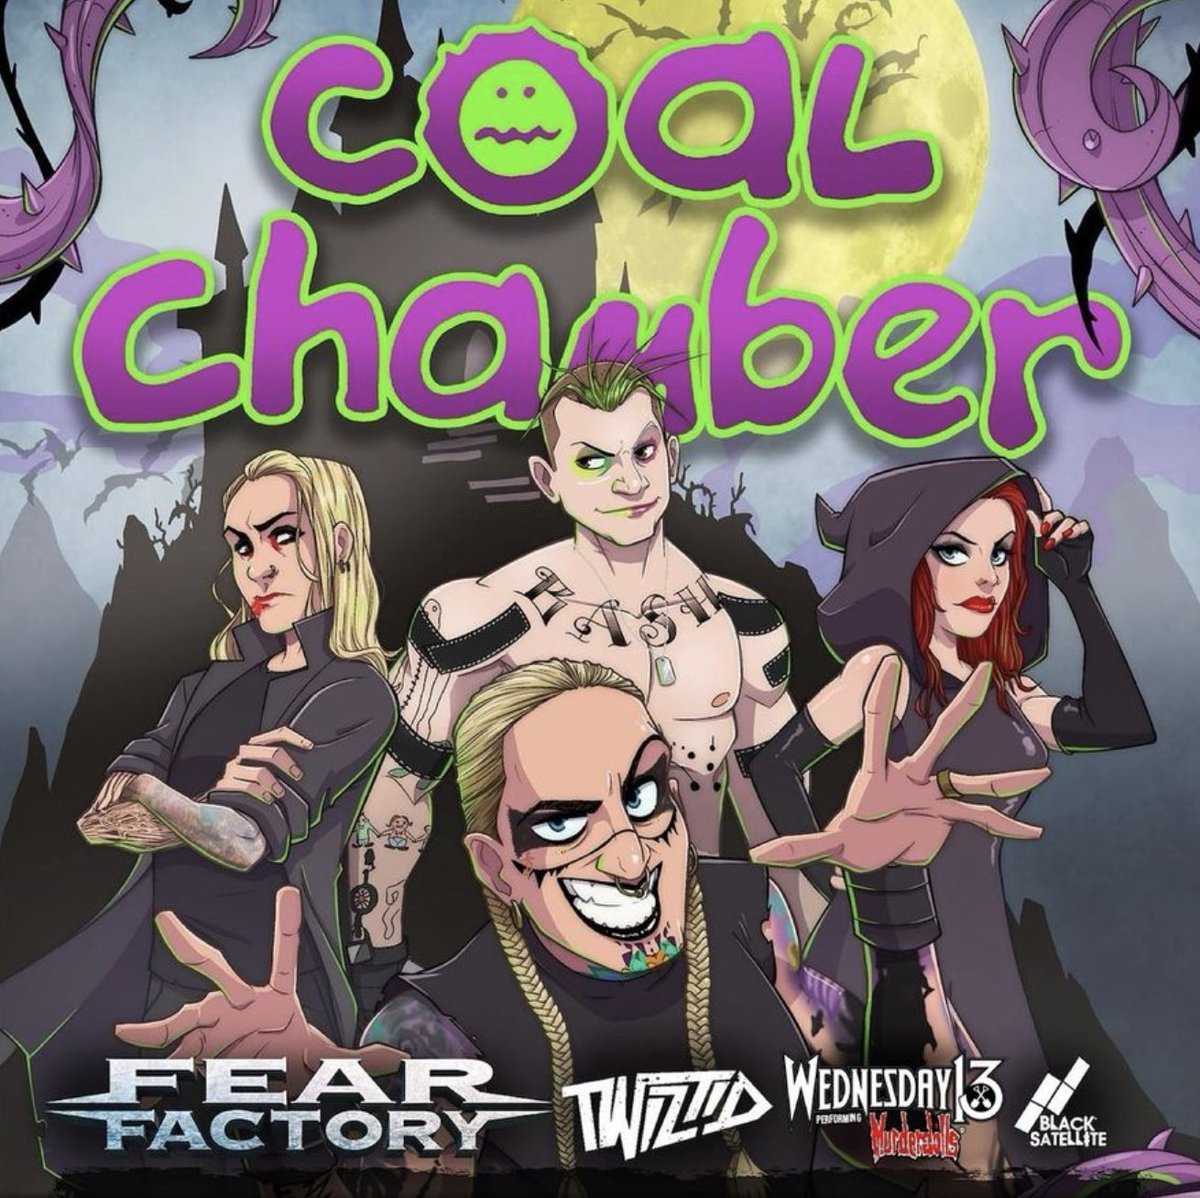 🎟️ COAL CHAMBER announce U.S. headline tour with FEAR FACTORY, TWIZTID, WEDNESDAY 13 and BLACK SATELLITE revolvermag.com/events/coal-ch…